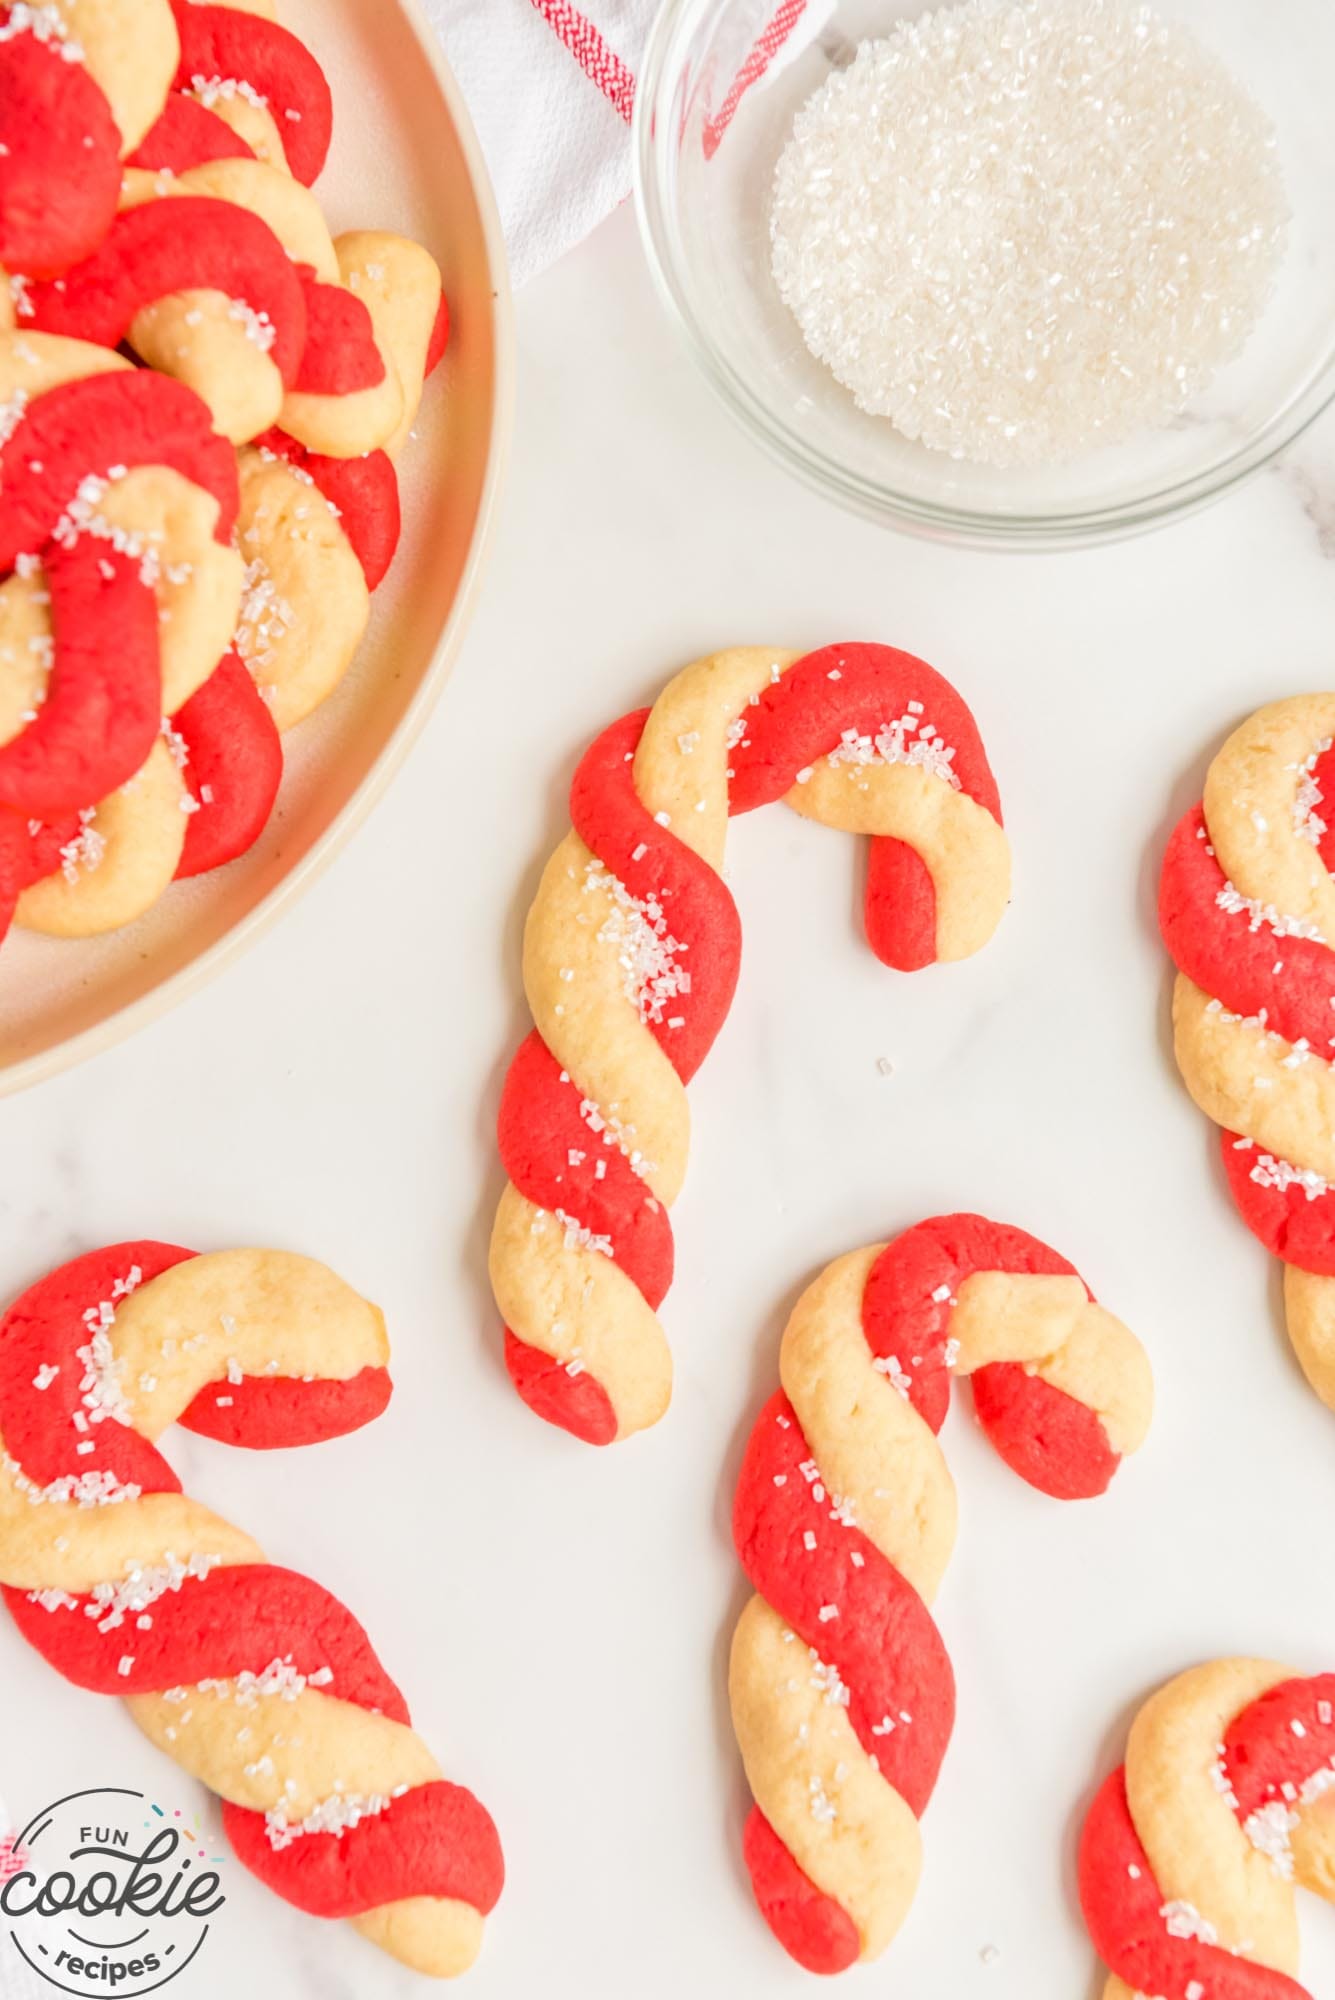 5 candy cane cookies on the counter next to a plate of the same. A bowl of coarse sugar is next to them.